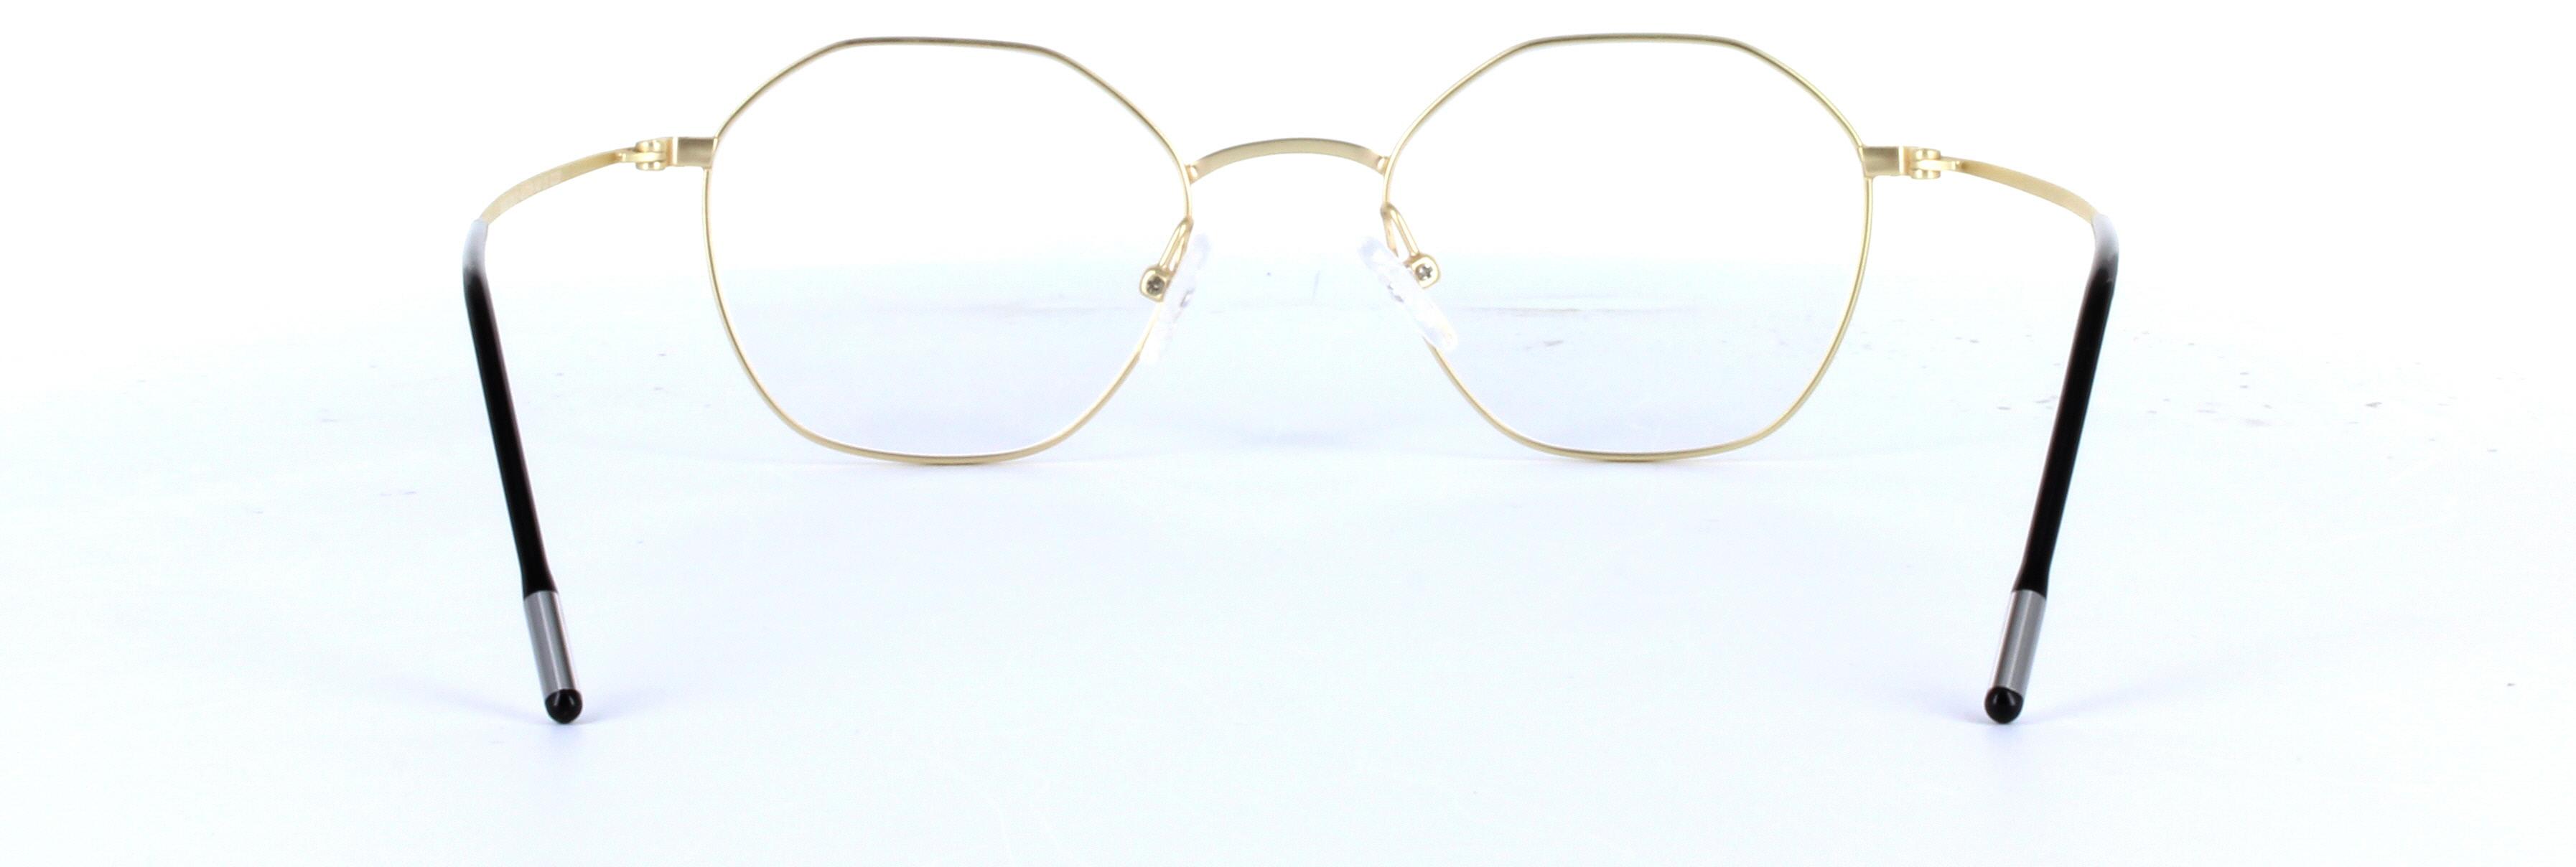 Maiver Gold and Black Full Rim Round Metal Glasses - Image View 3